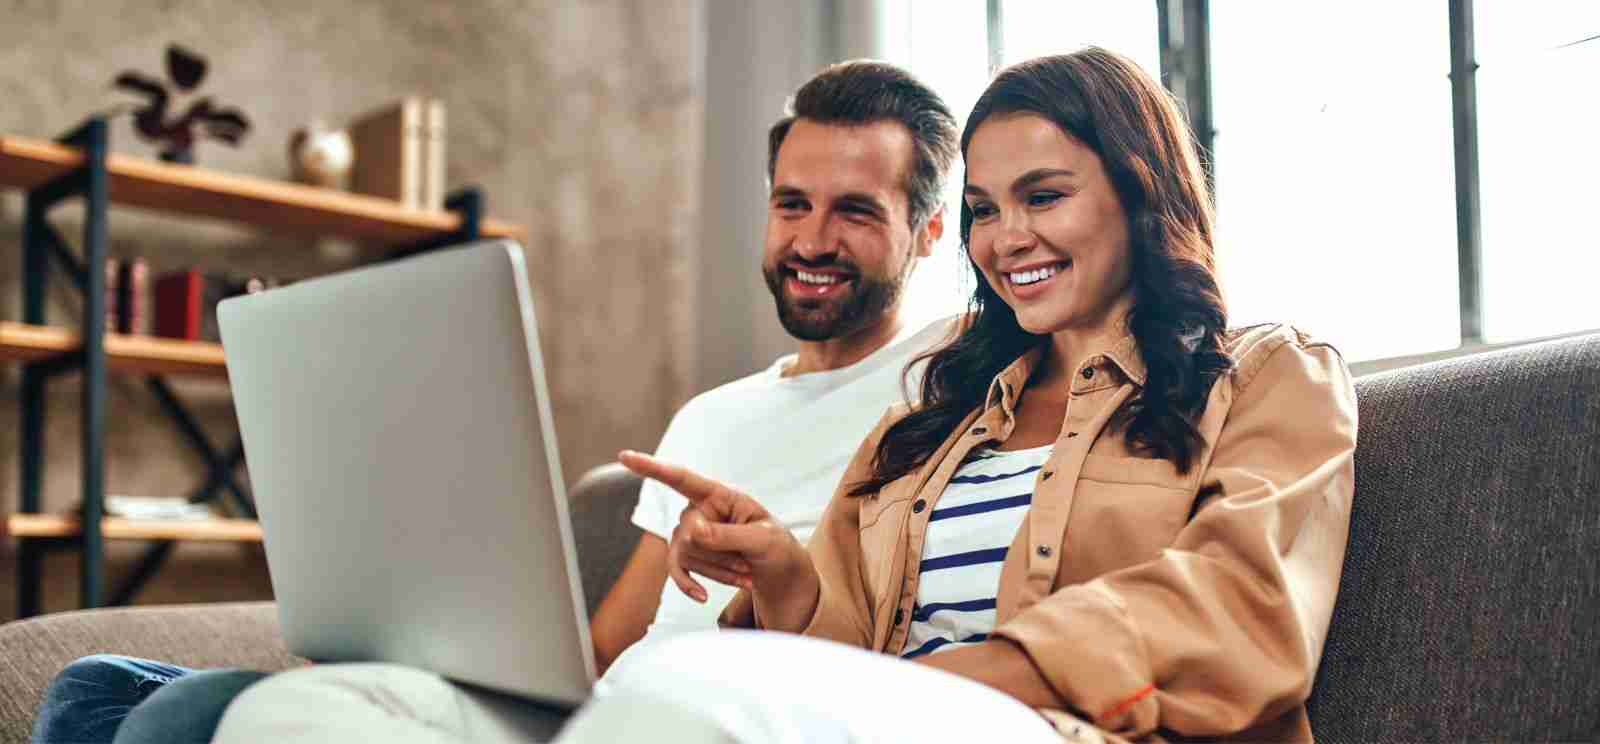 Man and woman sitting on a couch at home looking at a shared laptop